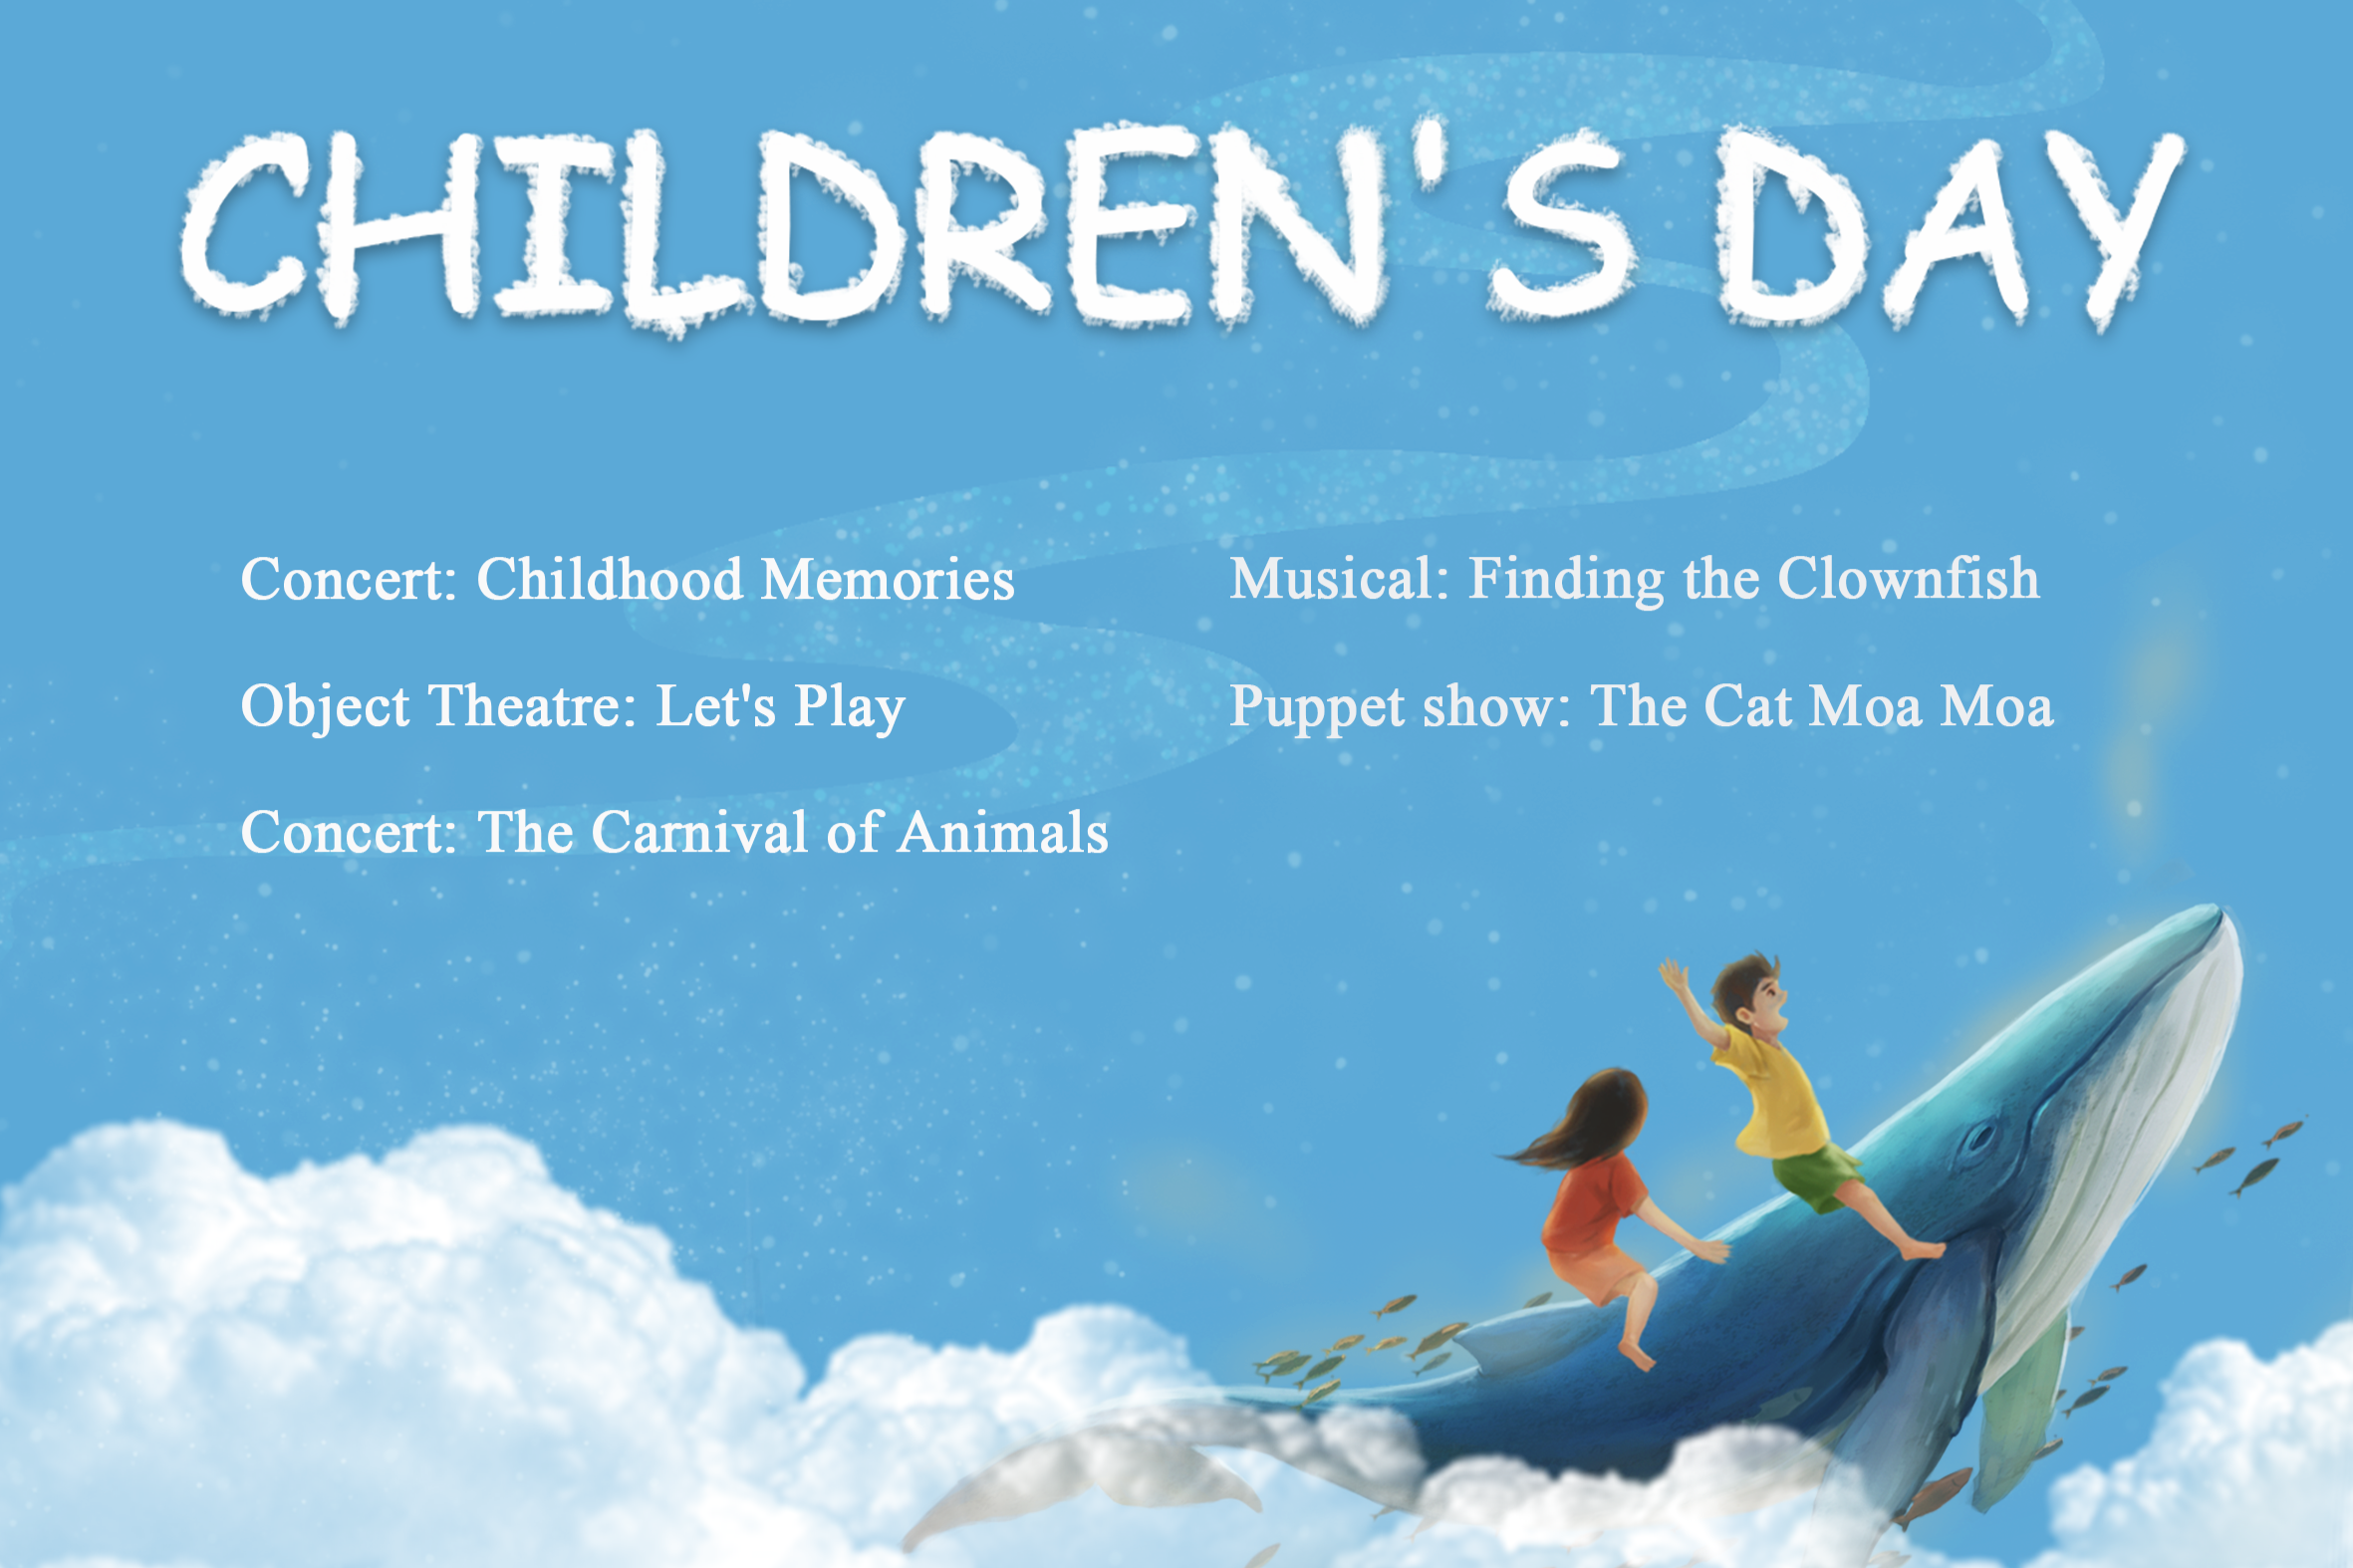 Where to spend Children's Day? Here are some recommendations!